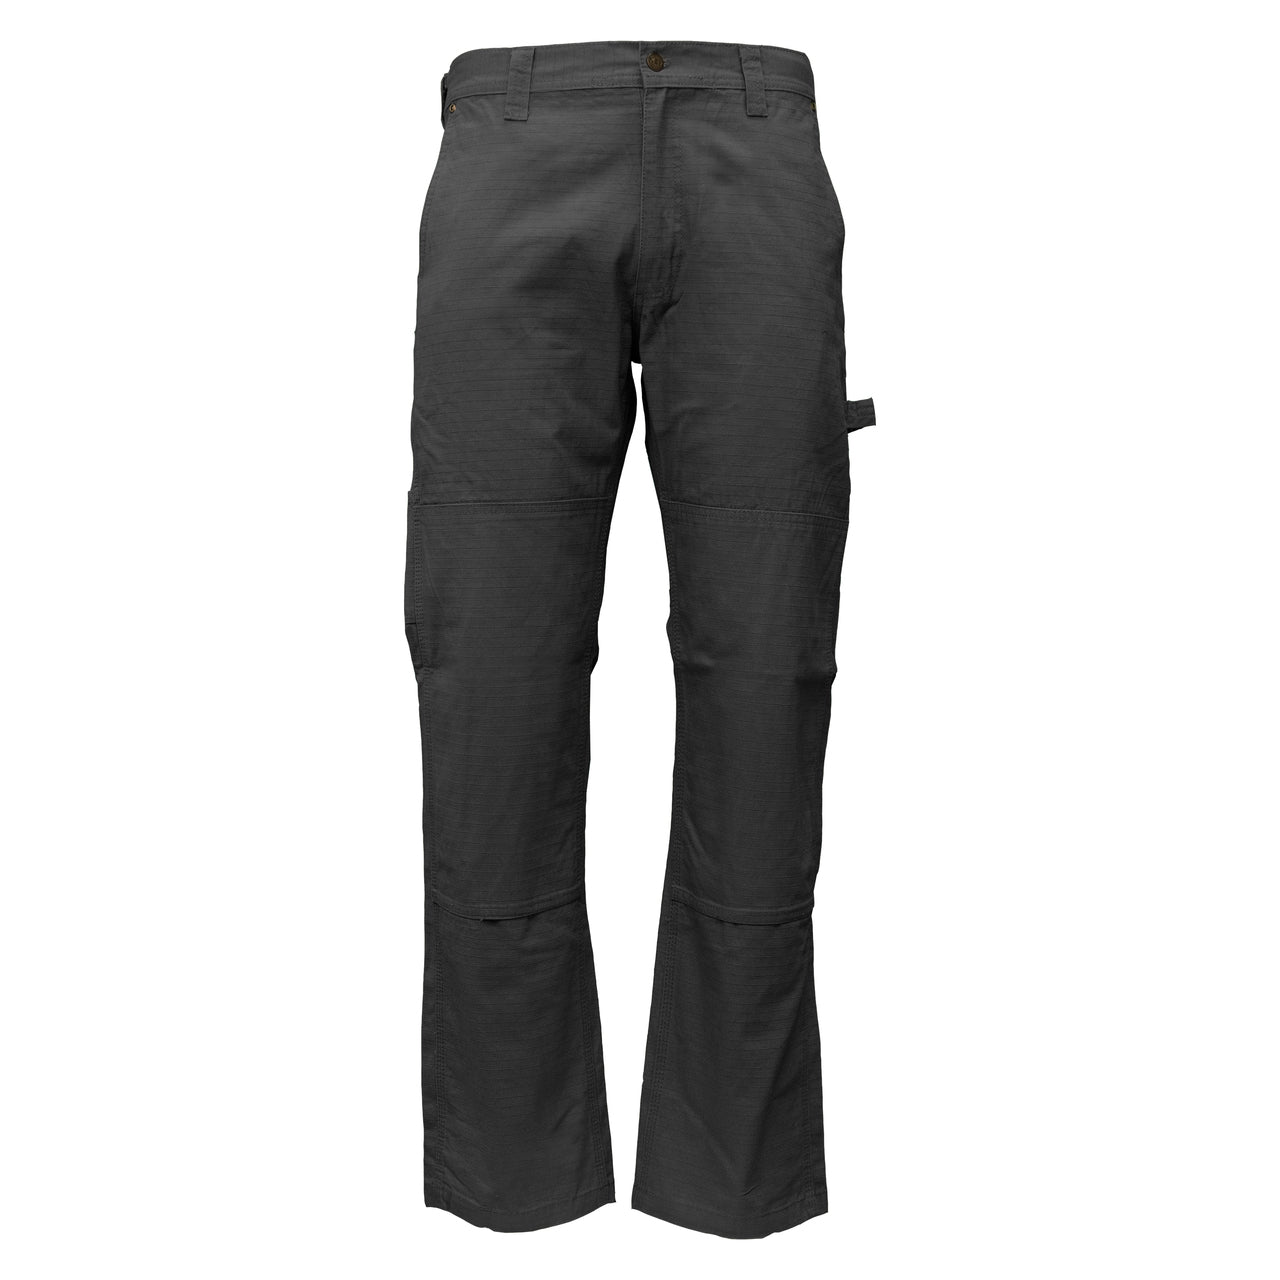 KEY Men's Rip Stop Double-Front Dungaree_Graphite - Work World - Workwear, Work Boots, Safety Gear